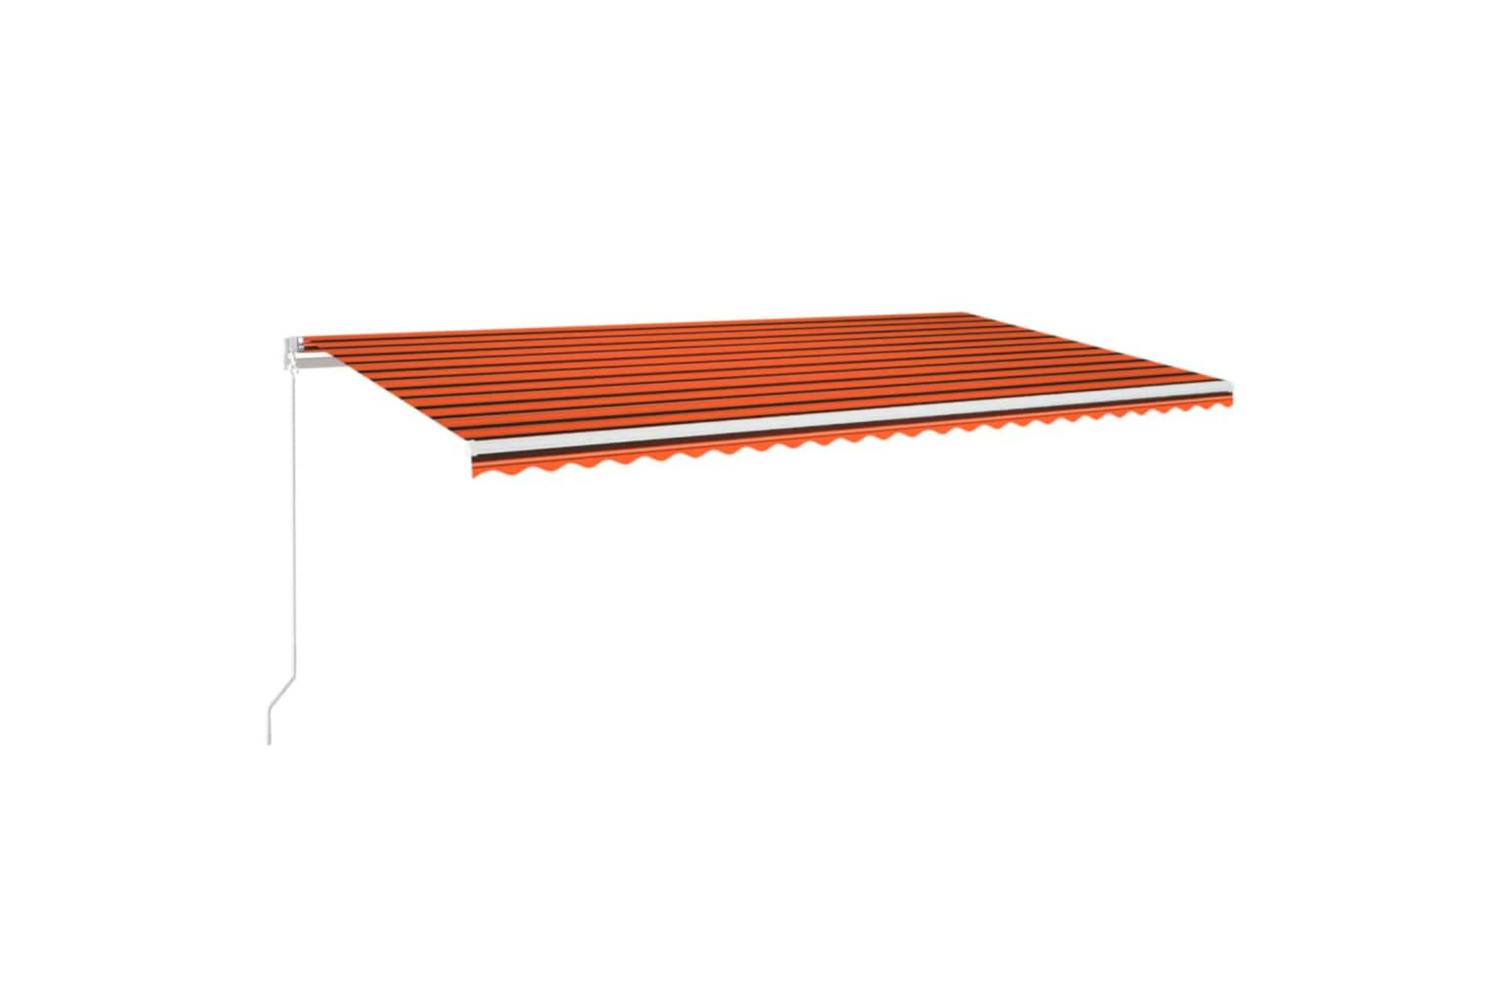 Vidaxl 3069045 Manual Retractable Awning With Led 600x350 Cm Orange And Brown